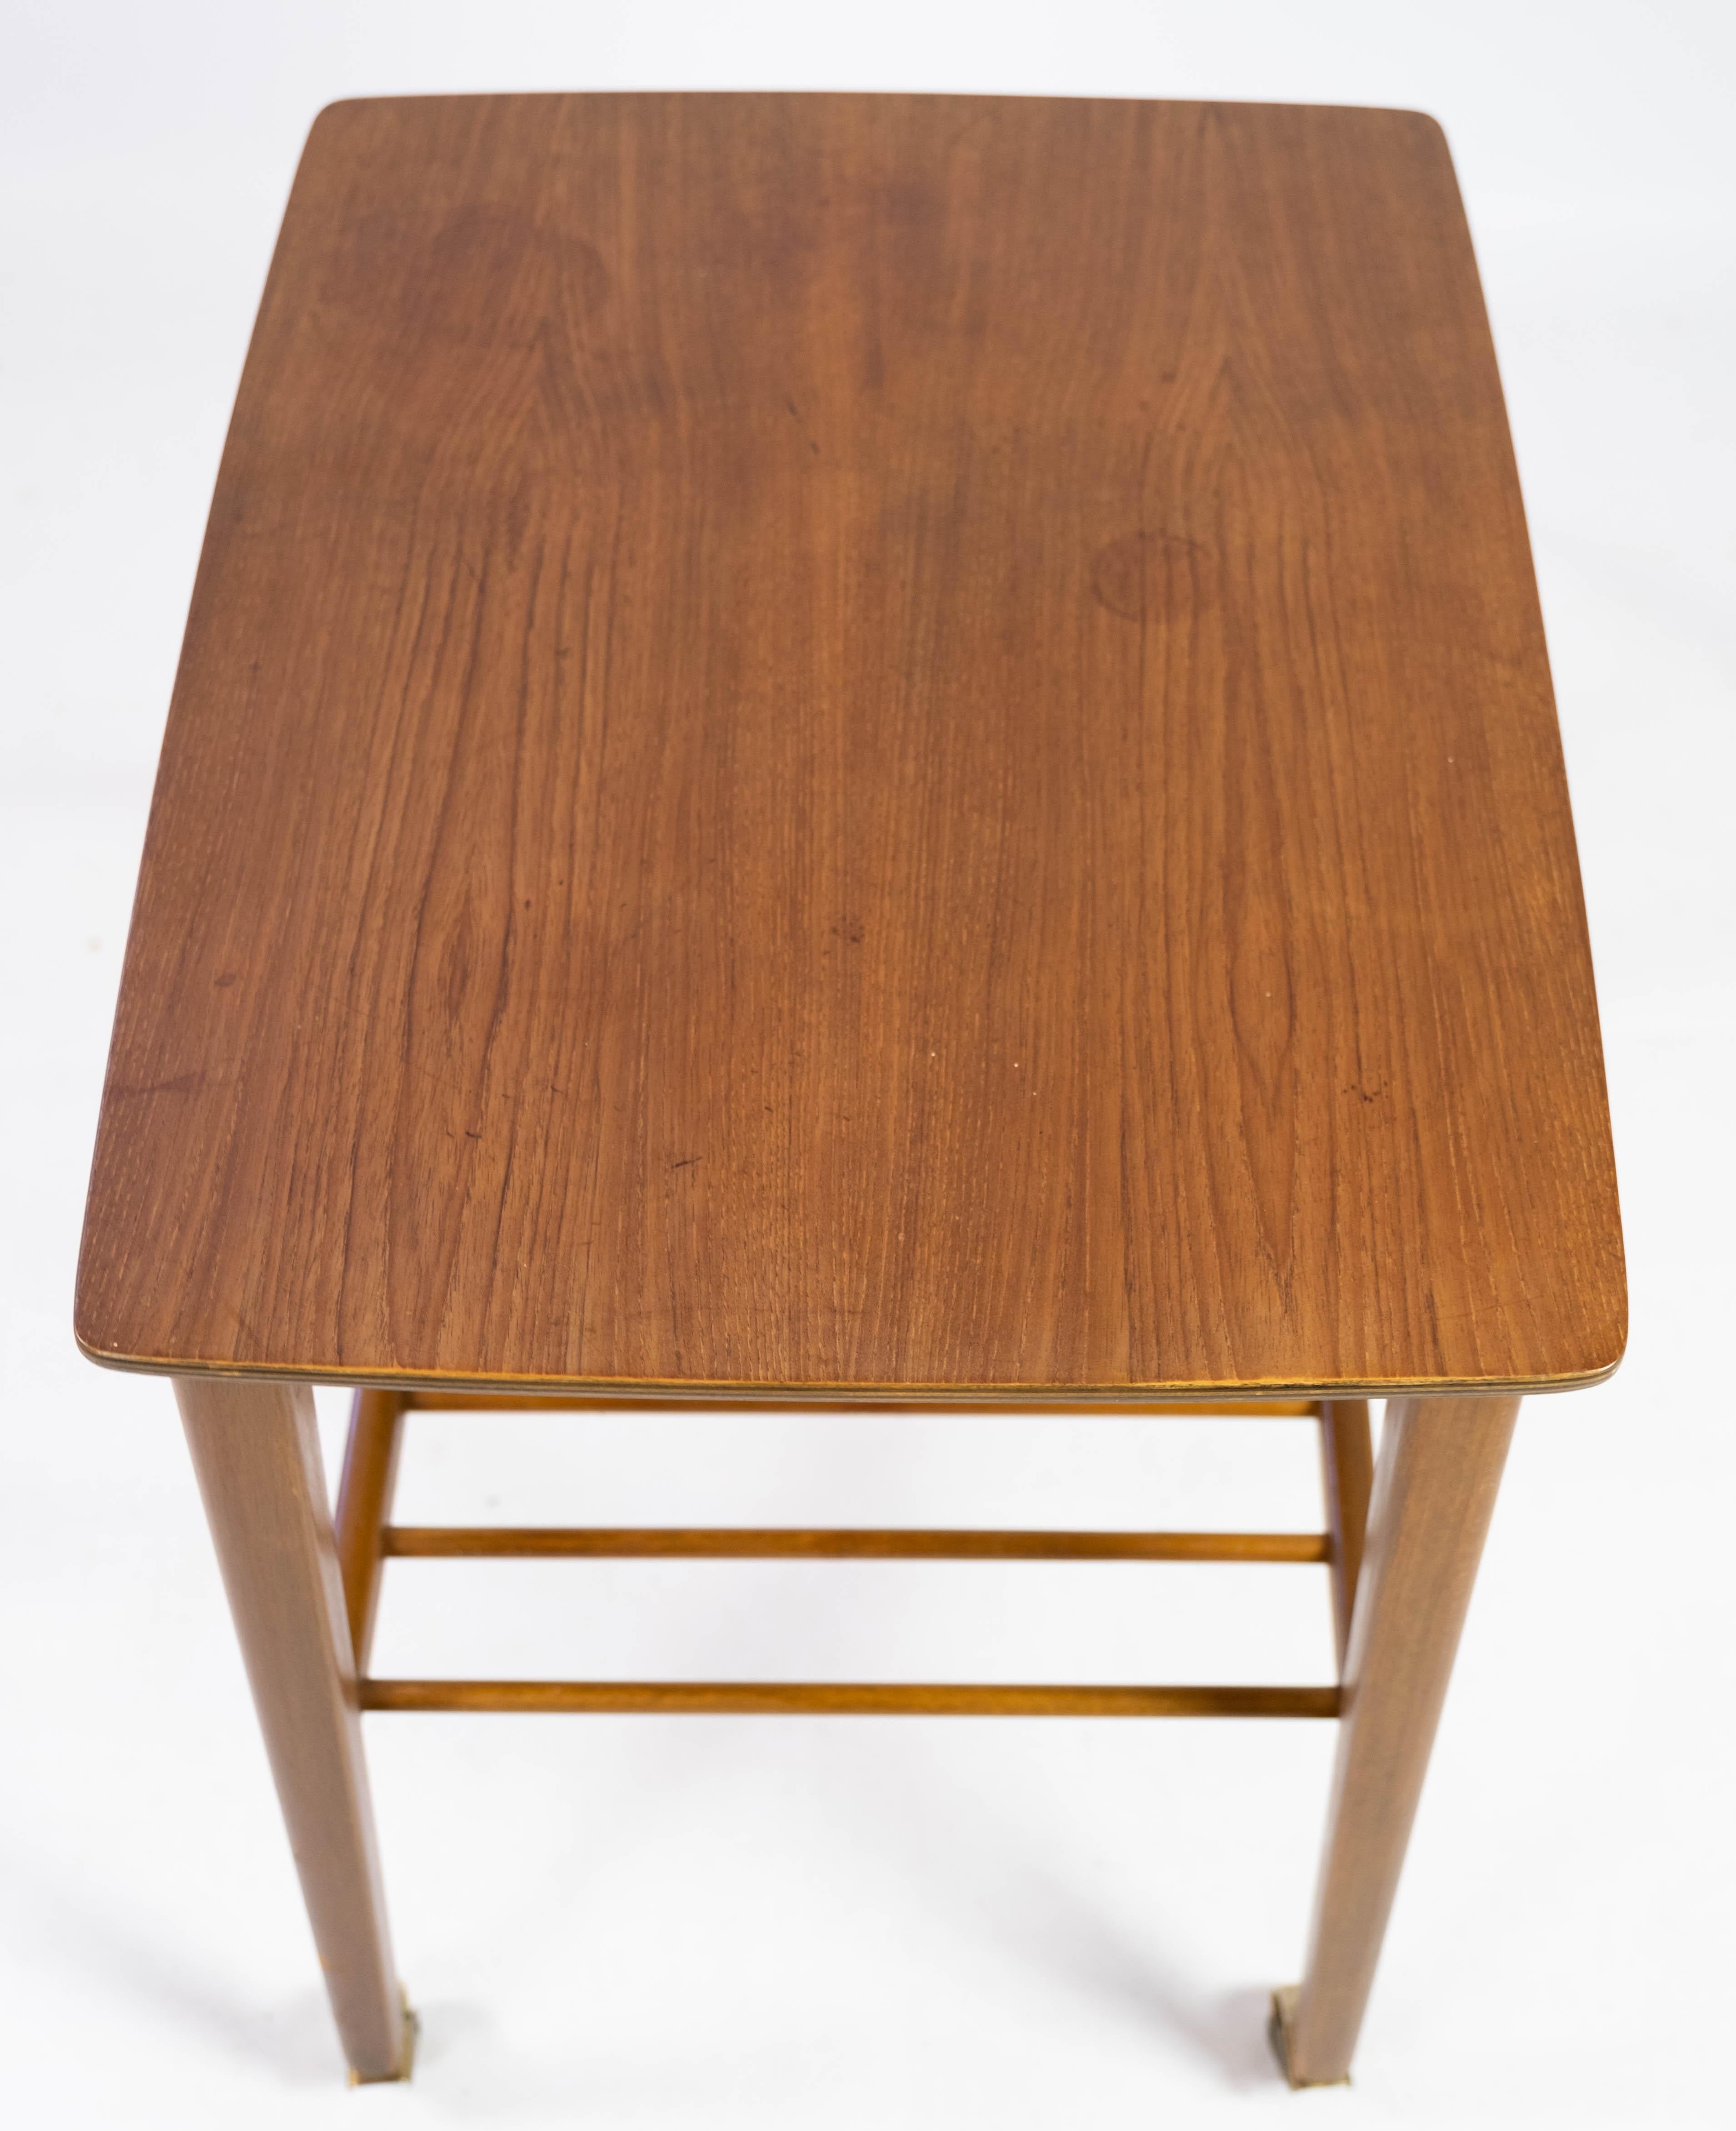 Side Table With Shelf & On Wheels Made In Teak, Danish Design From 1960s For Sale 1